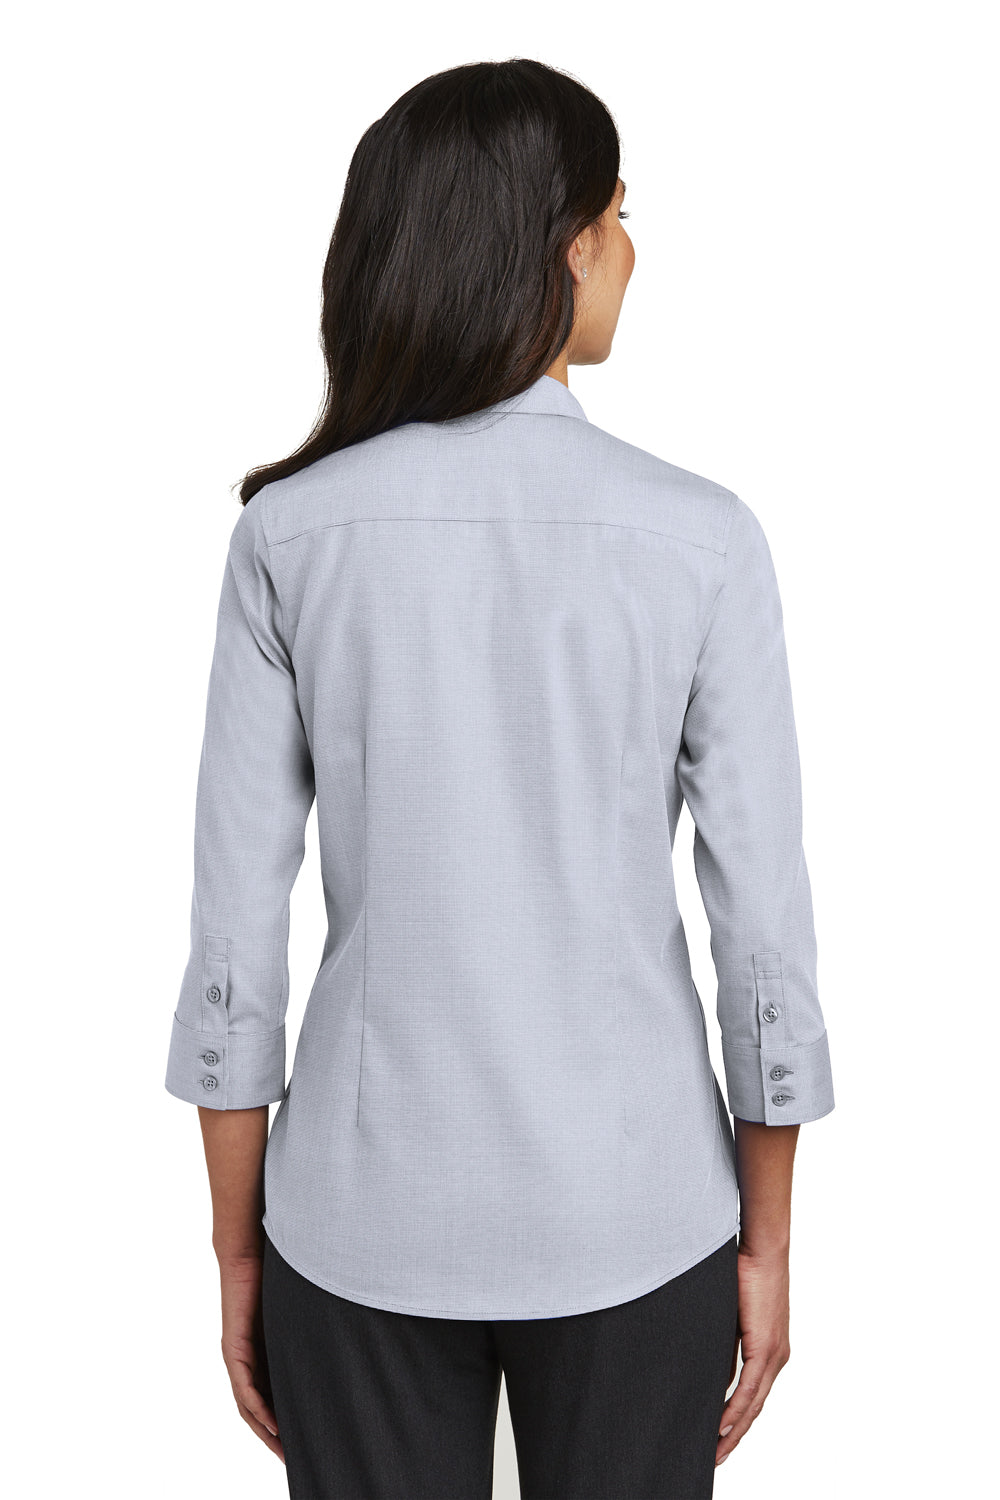 Red House RH690 Womens Nailhead Wrinkle Resistant 3/4 Sleeve Button Down Shirt Ice Grey Back